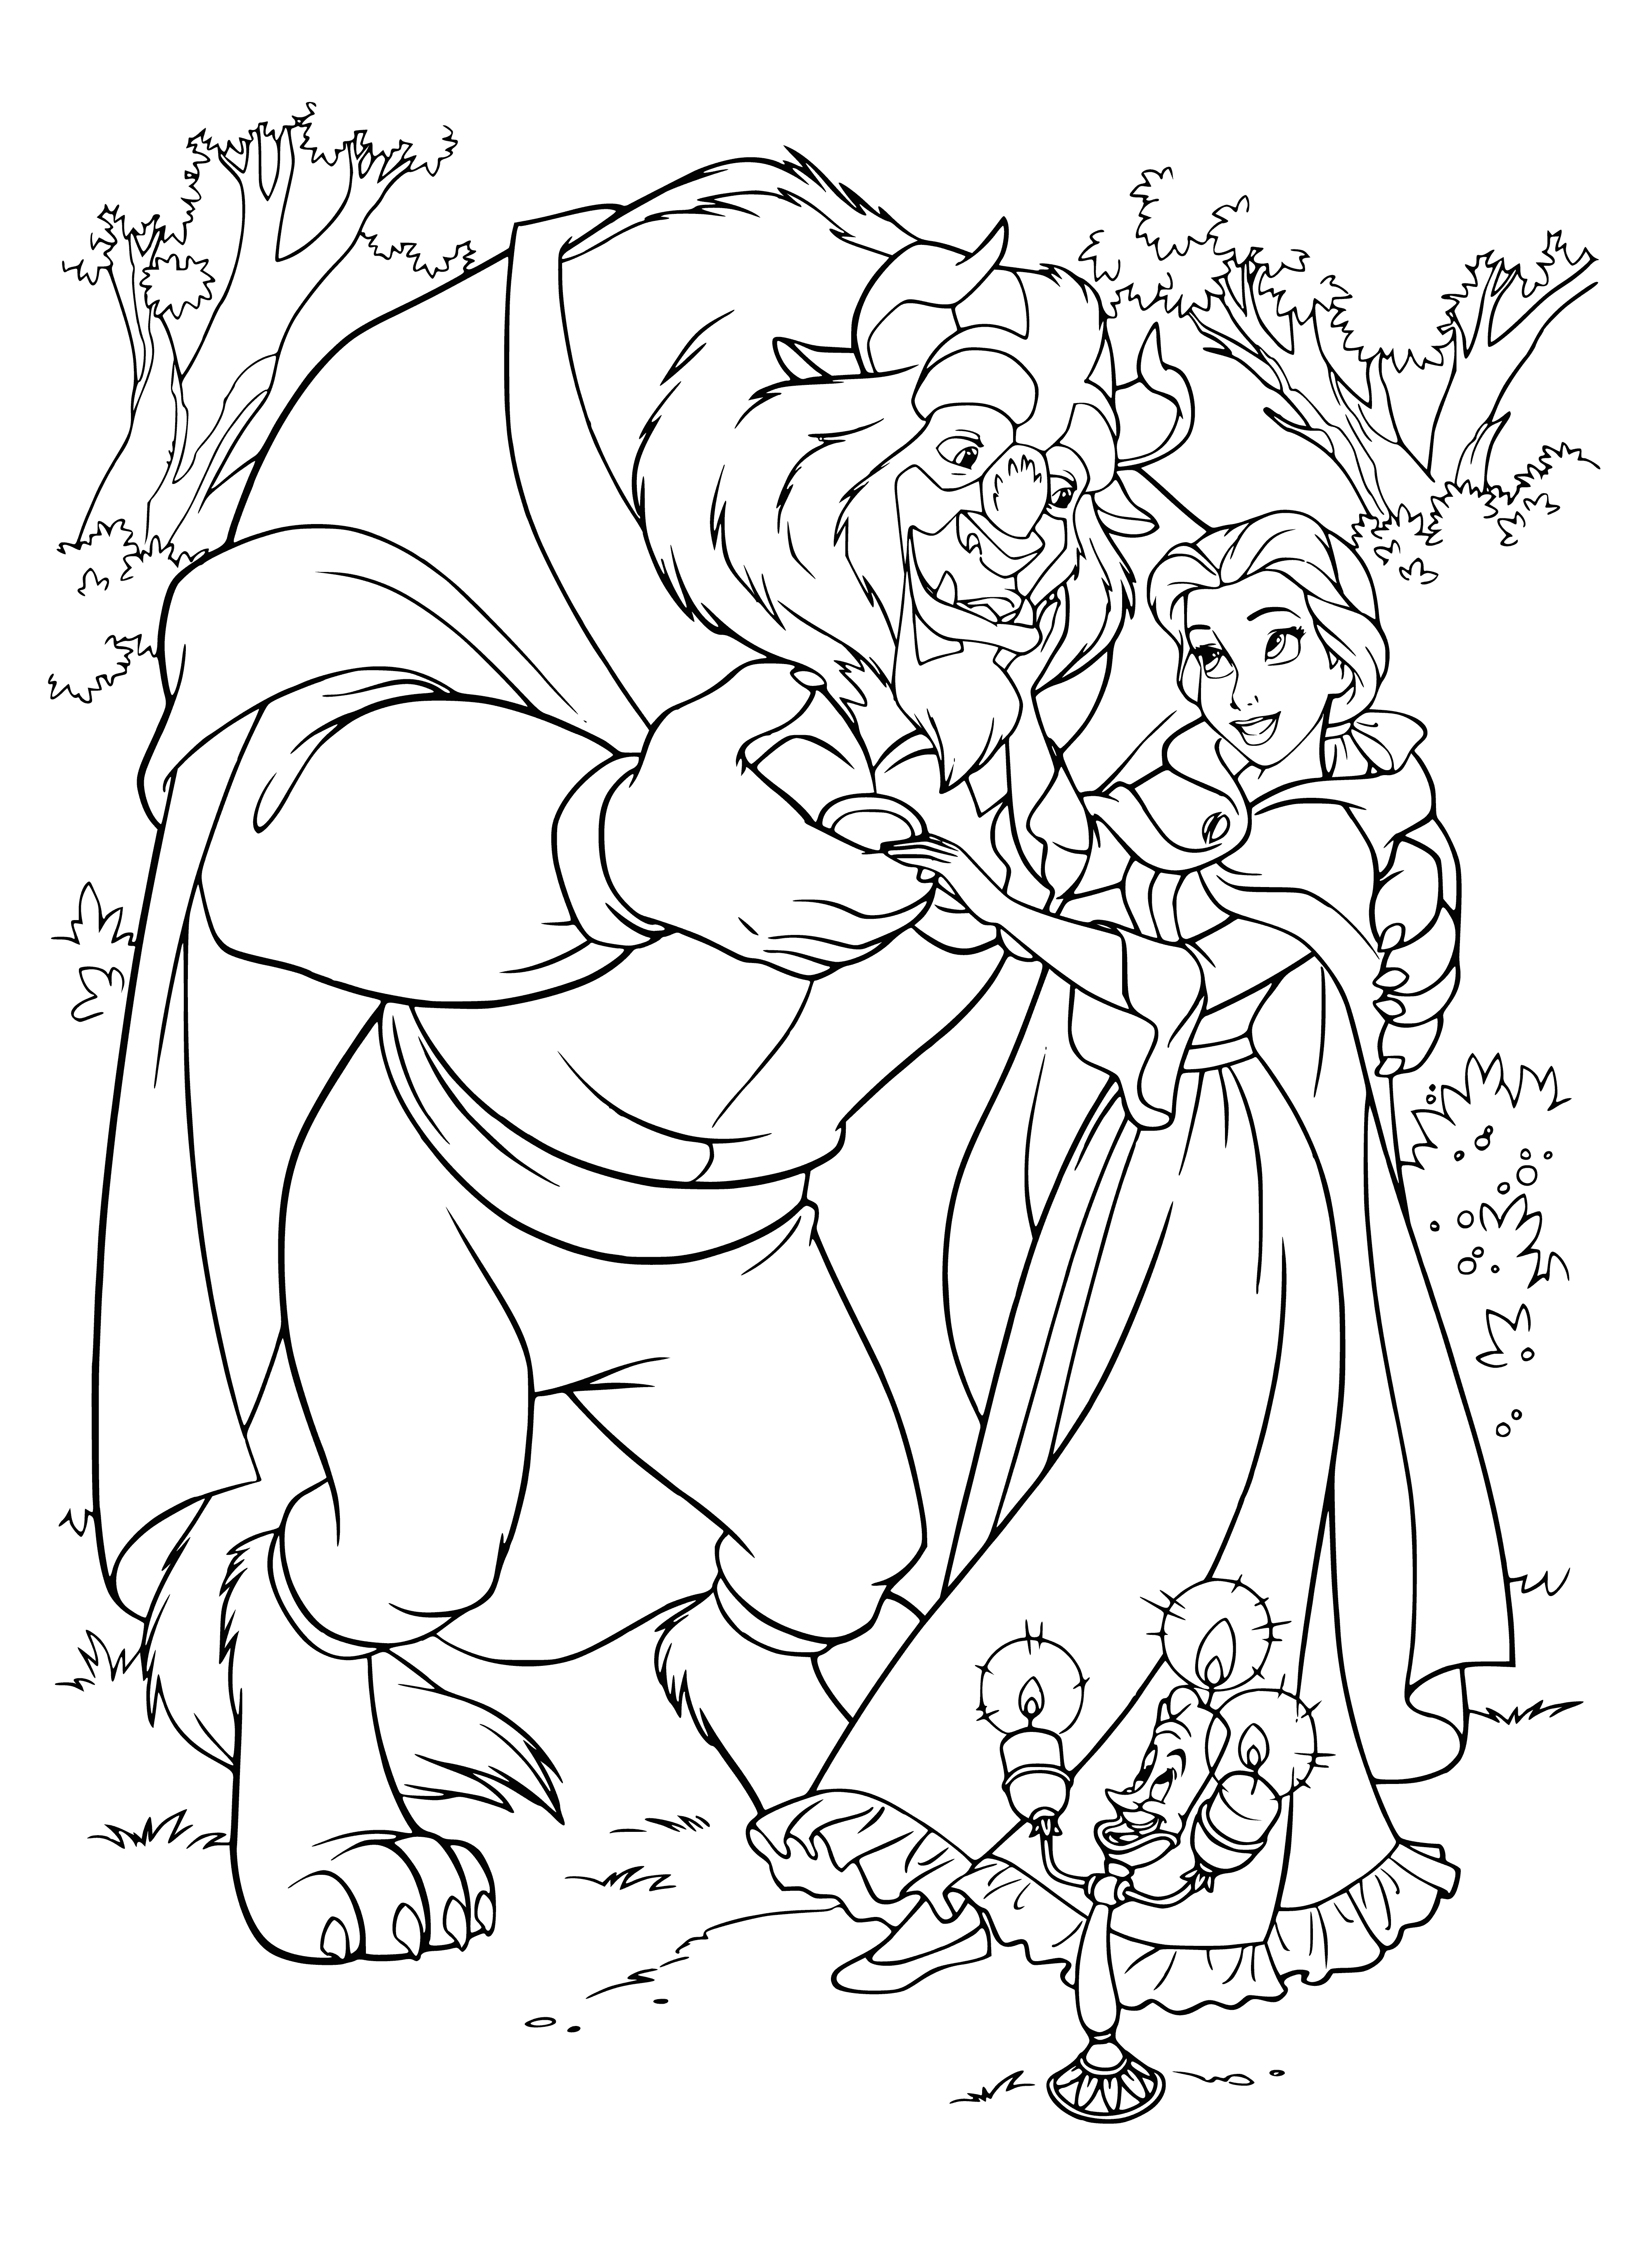 coloring page: Beast and Belle dancing in ballroom; Belle in yellow dress, Beast in black suit, smiling and looking very happy.